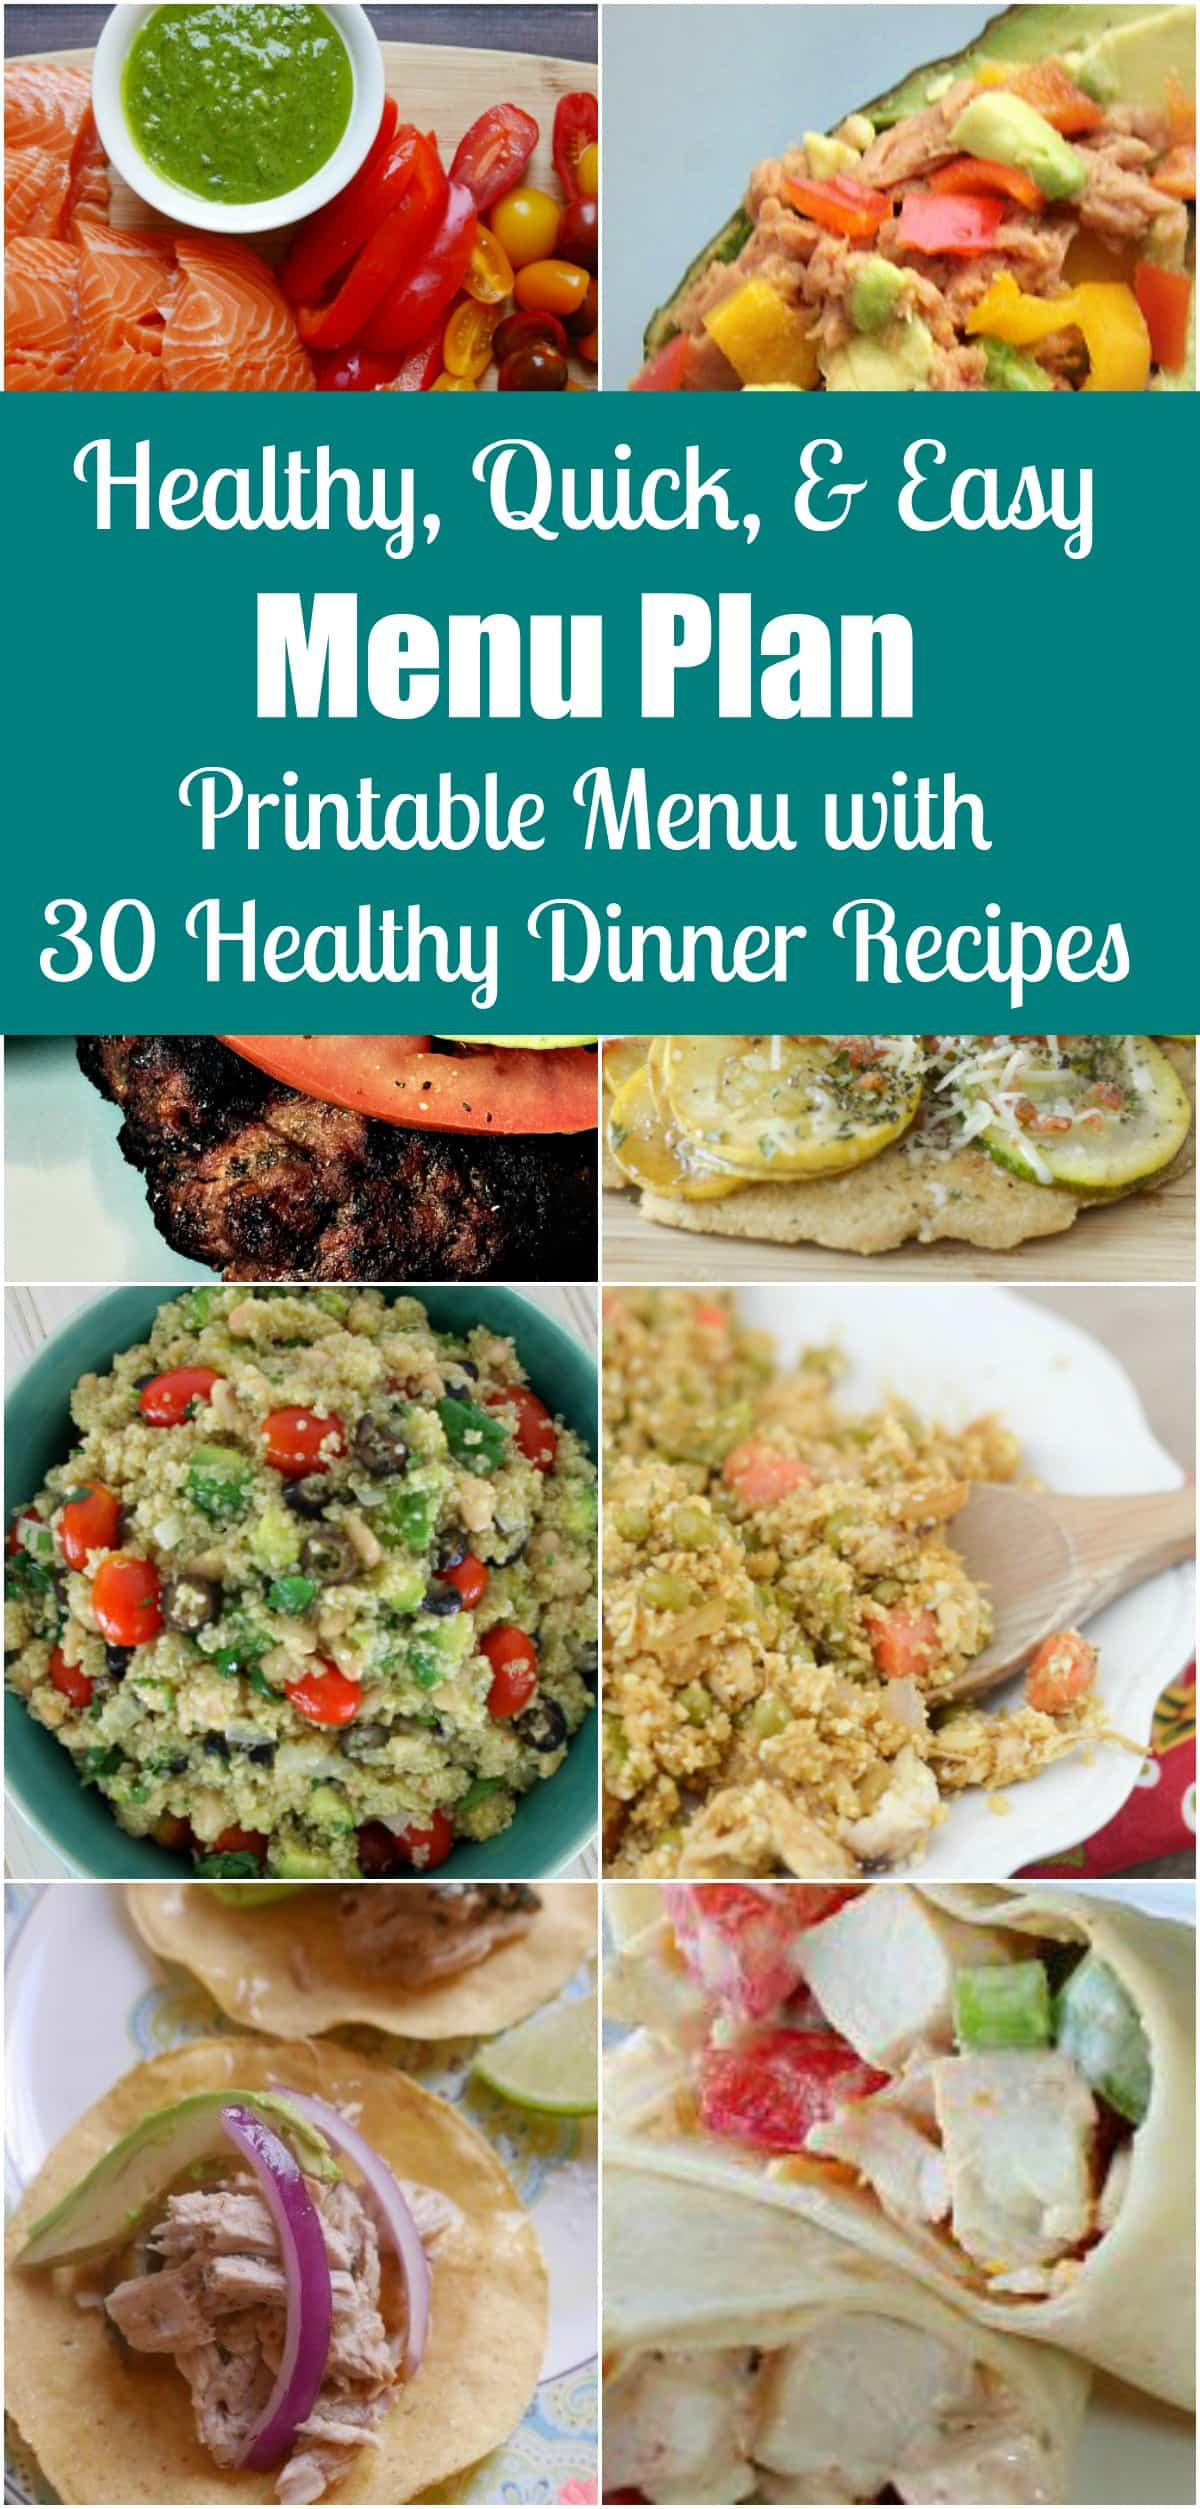 Quick And Easy Healthy Dinners
 Quick Easy & Healthy Dinner Menu Plan 30 Simple Recipes